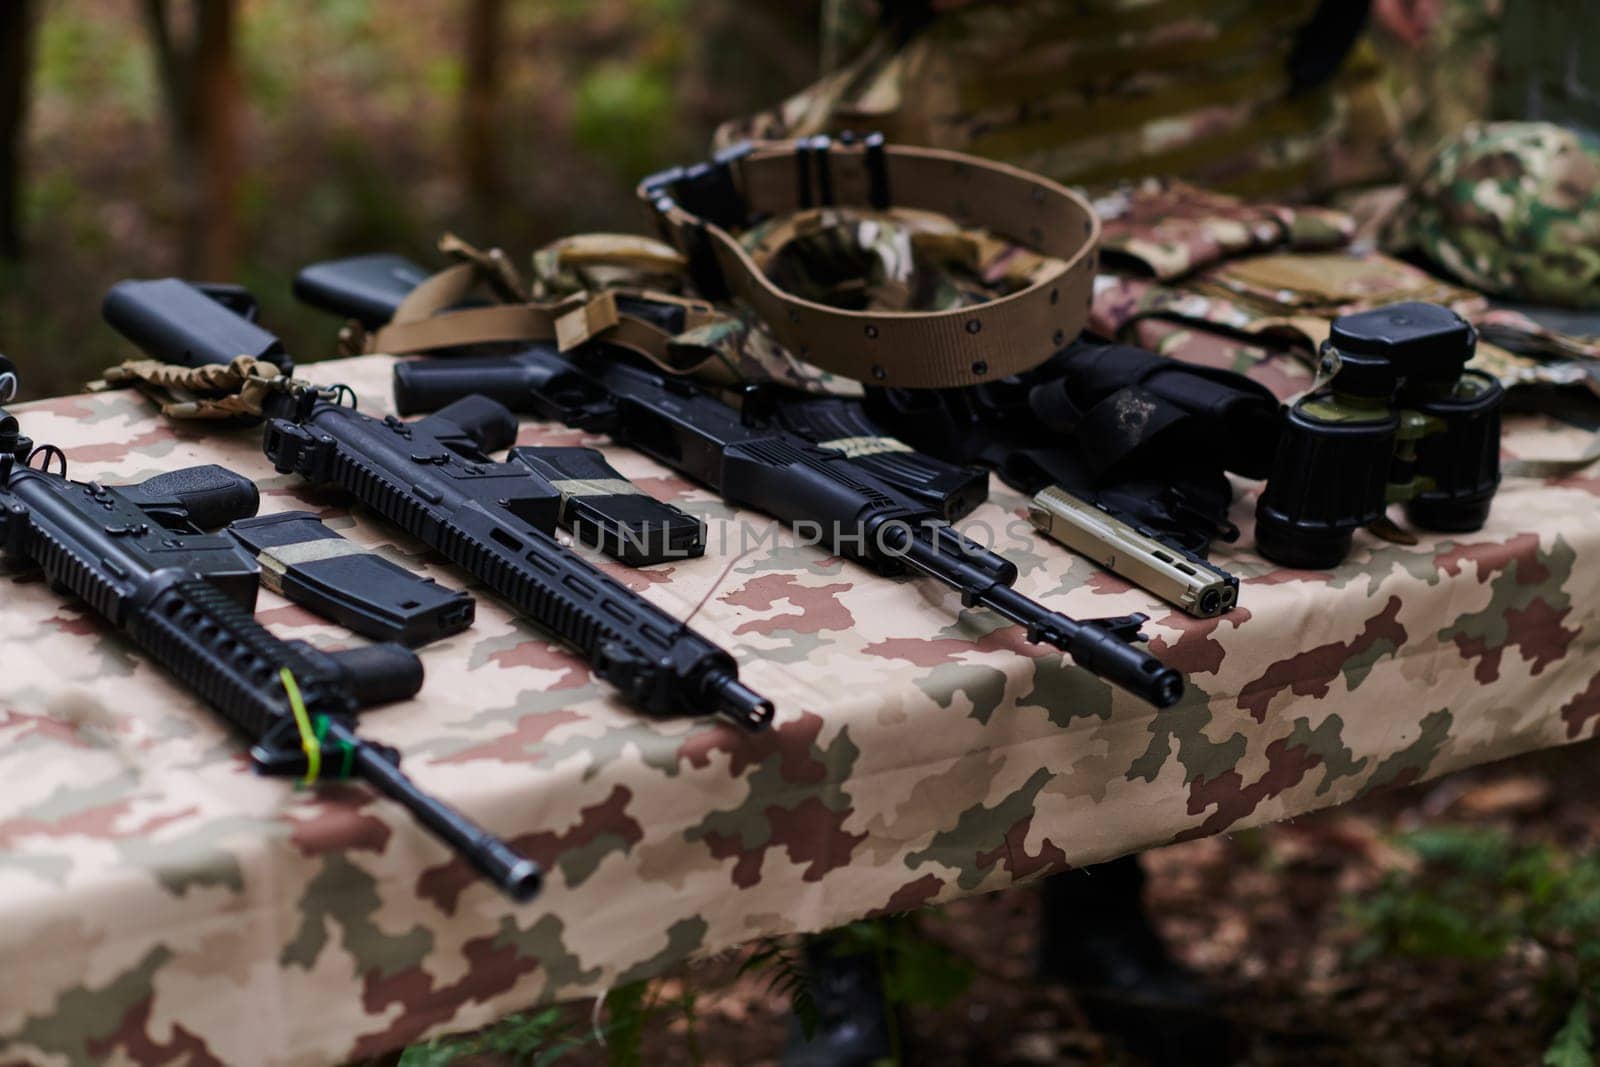 An array of military weapons, including rifles and pistols, is meticulously arranged on a table in a military base, presenting a close-up view of the diverse firepower and armament meticulously organized for readiness and strategic deployment.